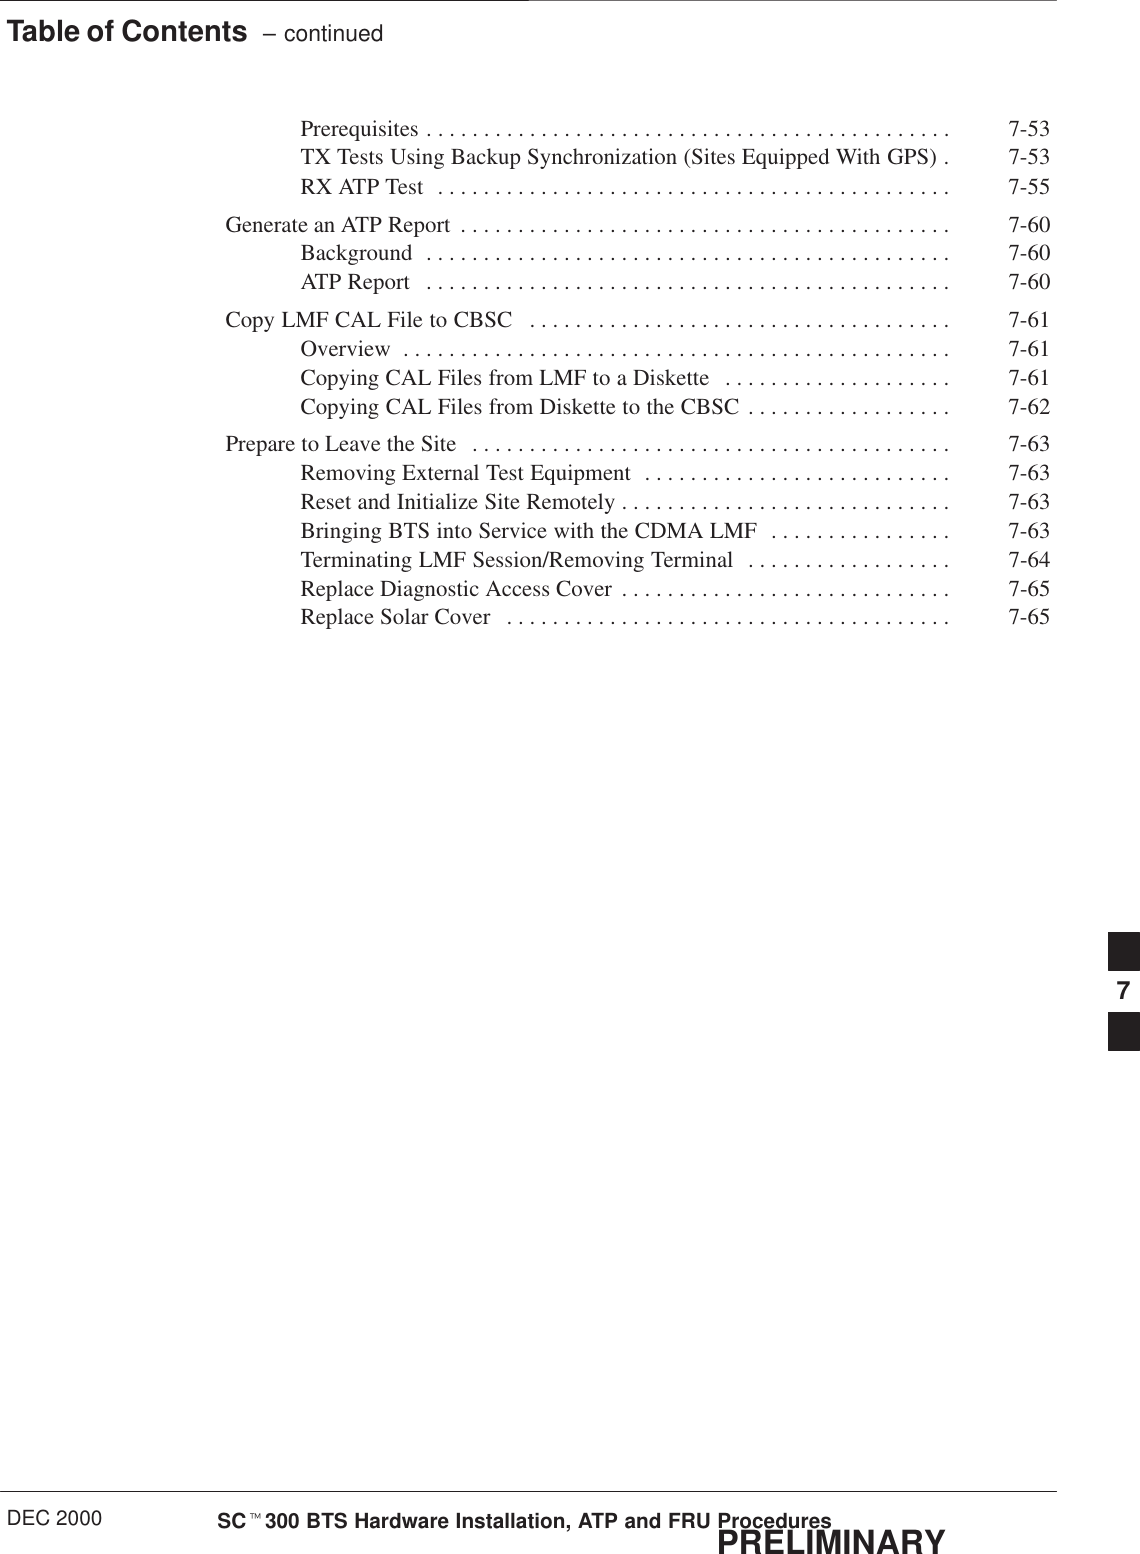 Table of Contents  – continuedDEC 2000 SCt300 BTS Hardware Installation, ATP and FRU ProceduresPRELIMINARYPrerequisites 7-53. . . . . . . . . . . . . . . . . . . . . . . . . . . . . . . . . . . . . . . . . . . . . . TX Tests Using Backup Synchronization (Sites Equipped With GPS) 7-53. RX ATP Test 7-55. . . . . . . . . . . . . . . . . . . . . . . . . . . . . . . . . . . . . . . . . . . . . Generate an ATP Report 7-60. . . . . . . . . . . . . . . . . . . . . . . . . . . . . . . . . . . . . . . . . . . Background 7-60. . . . . . . . . . . . . . . . . . . . . . . . . . . . . . . . . . . . . . . . . . . . . . ATP Report 7-60. . . . . . . . . . . . . . . . . . . . . . . . . . . . . . . . . . . . . . . . . . . . . . Copy LMF CAL File to CBSC 7-61. . . . . . . . . . . . . . . . . . . . . . . . . . . . . . . . . . . . . Overview 7-61. . . . . . . . . . . . . . . . . . . . . . . . . . . . . . . . . . . . . . . . . . . . . . . . Copying CAL Files from LMF to a Diskette 7-61. . . . . . . . . . . . . . . . . . . . Copying CAL Files from Diskette to the CBSC 7-62. . . . . . . . . . . . . . . . . . Prepare to Leave the Site 7-63. . . . . . . . . . . . . . . . . . . . . . . . . . . . . . . . . . . . . . . . . . Removing External Test Equipment 7-63. . . . . . . . . . . . . . . . . . . . . . . . . . . Reset and Initialize Site Remotely 7-63. . . . . . . . . . . . . . . . . . . . . . . . . . . . . Bringing BTS into Service with the CDMA LMF 7-63. . . . . . . . . . . . . . . . Terminating LMF Session/Removing Terminal 7-64. . . . . . . . . . . . . . . . . . Replace Diagnostic Access Cover 7-65. . . . . . . . . . . . . . . . . . . . . . . . . . . . . Replace Solar Cover 7-65. . . . . . . . . . . . . . . . . . . . . . . . . . . . . . . . . . . . . . . 7